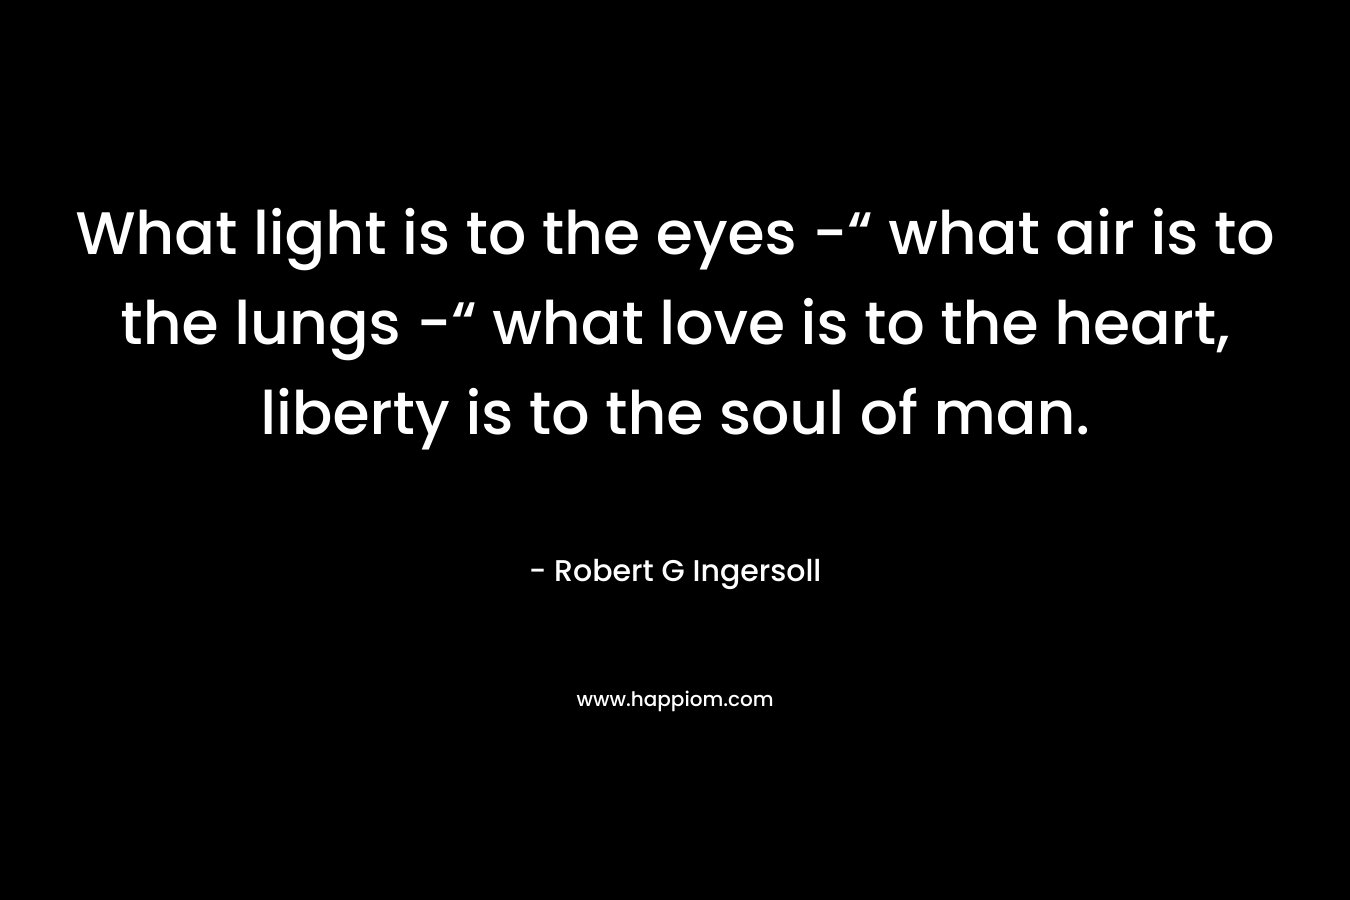 What light is to the eyes -“ what air is to the lungs -“ what love is to the heart, liberty is to the soul of man. – Robert G Ingersoll